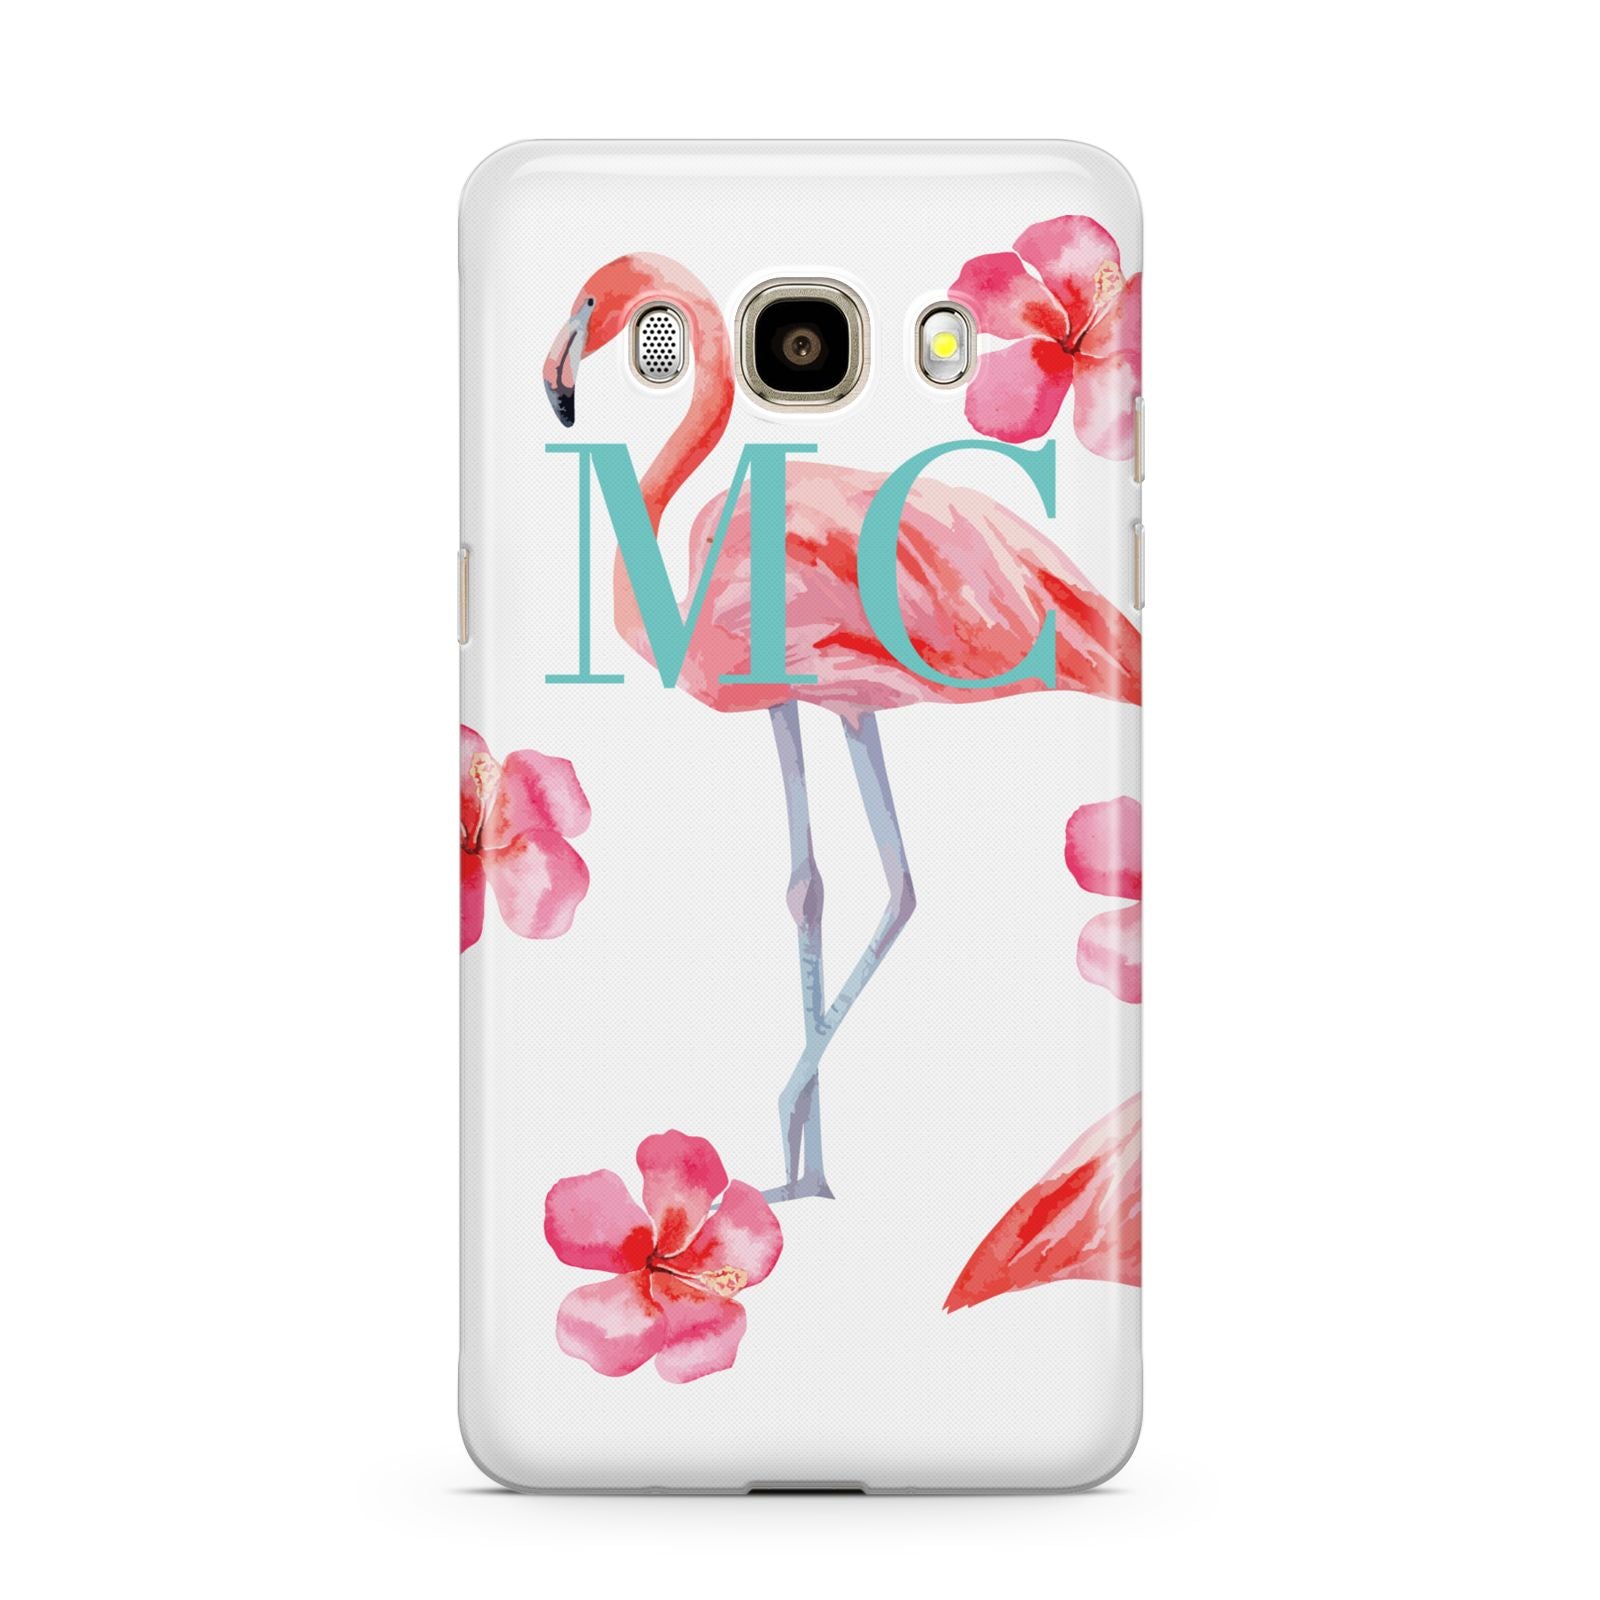 Personalised Initials Flamingo 3 Samsung Galaxy J7 2016 Case on gold phone